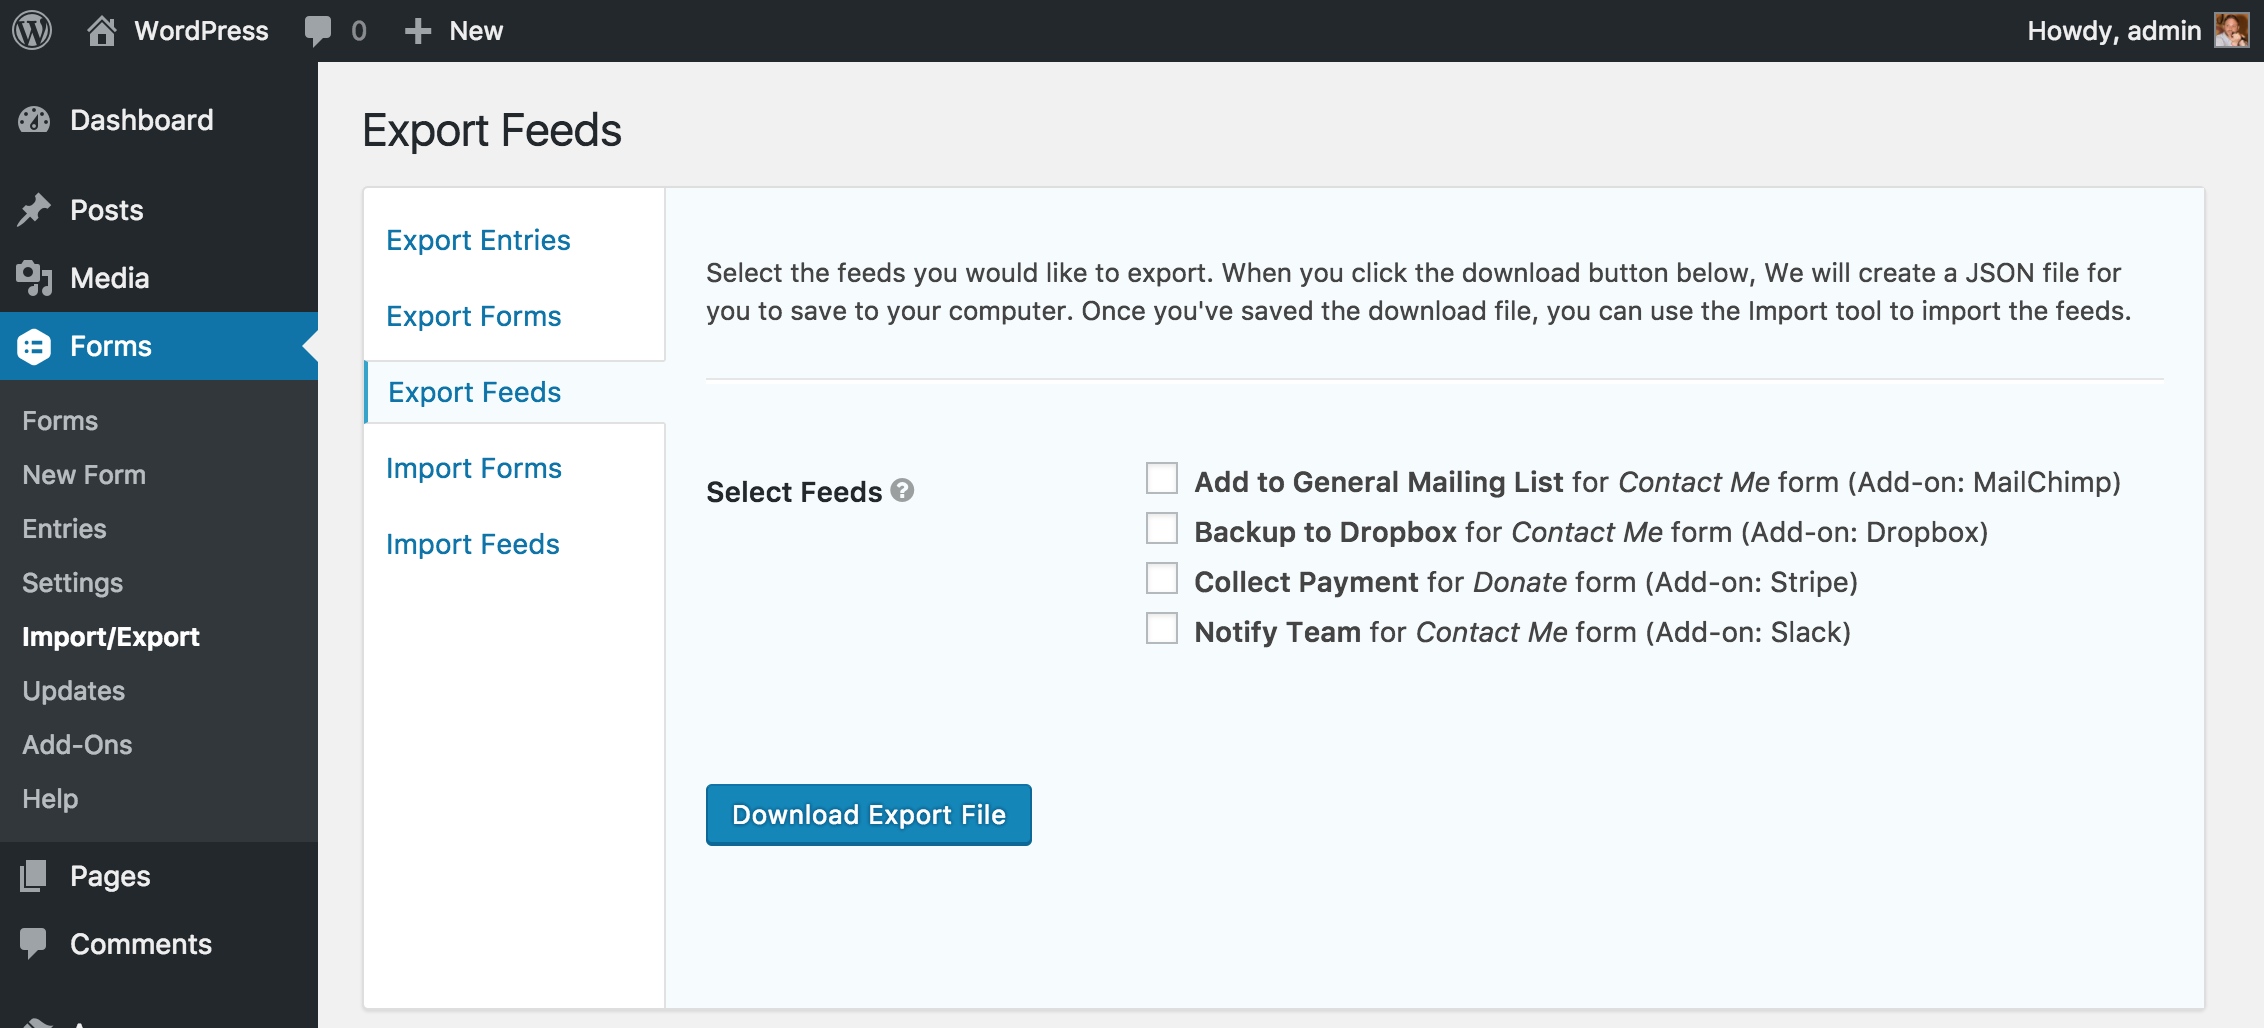 This screen shot shows you how to export feeds.